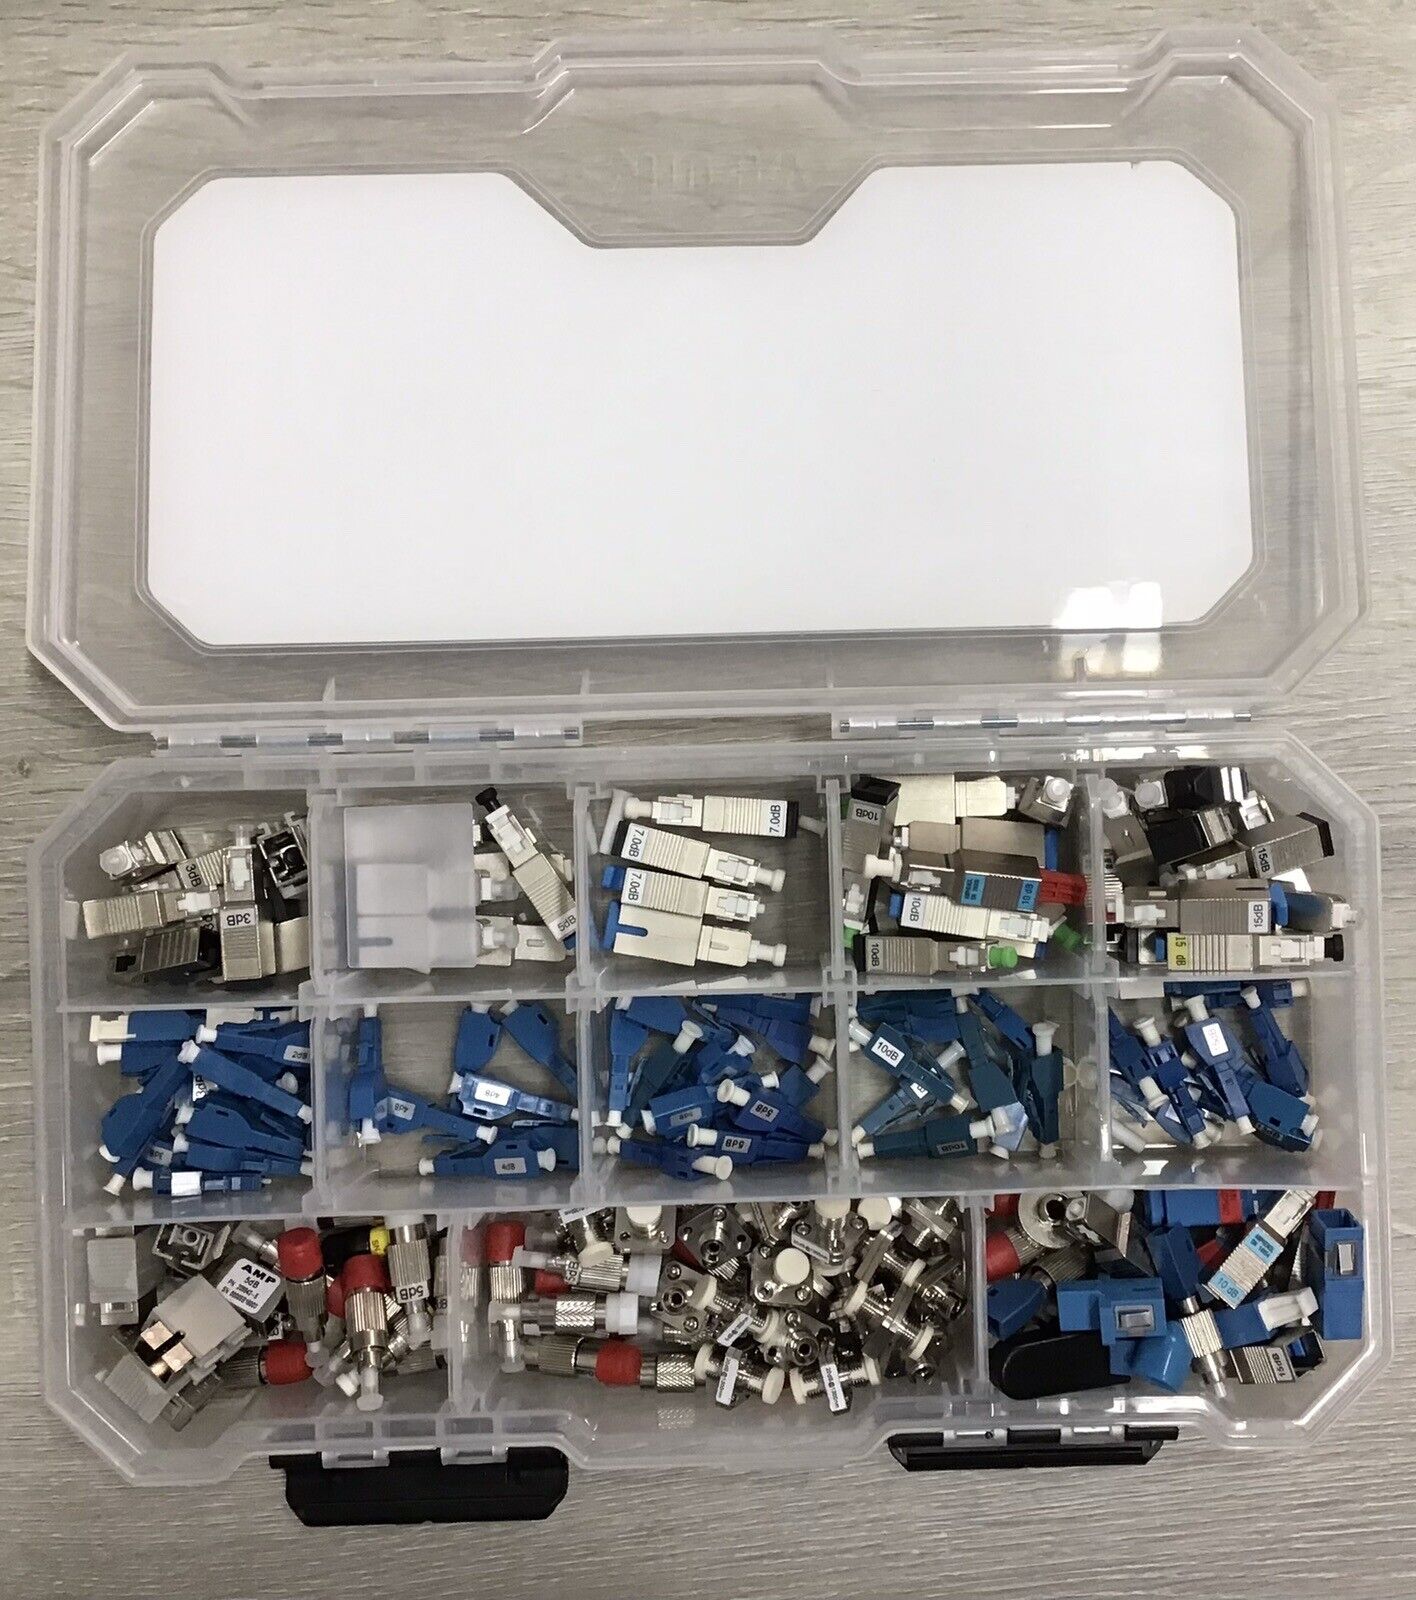 (LOT OF OVER 100) Optical Fiber Connectors & Adopters - NEW